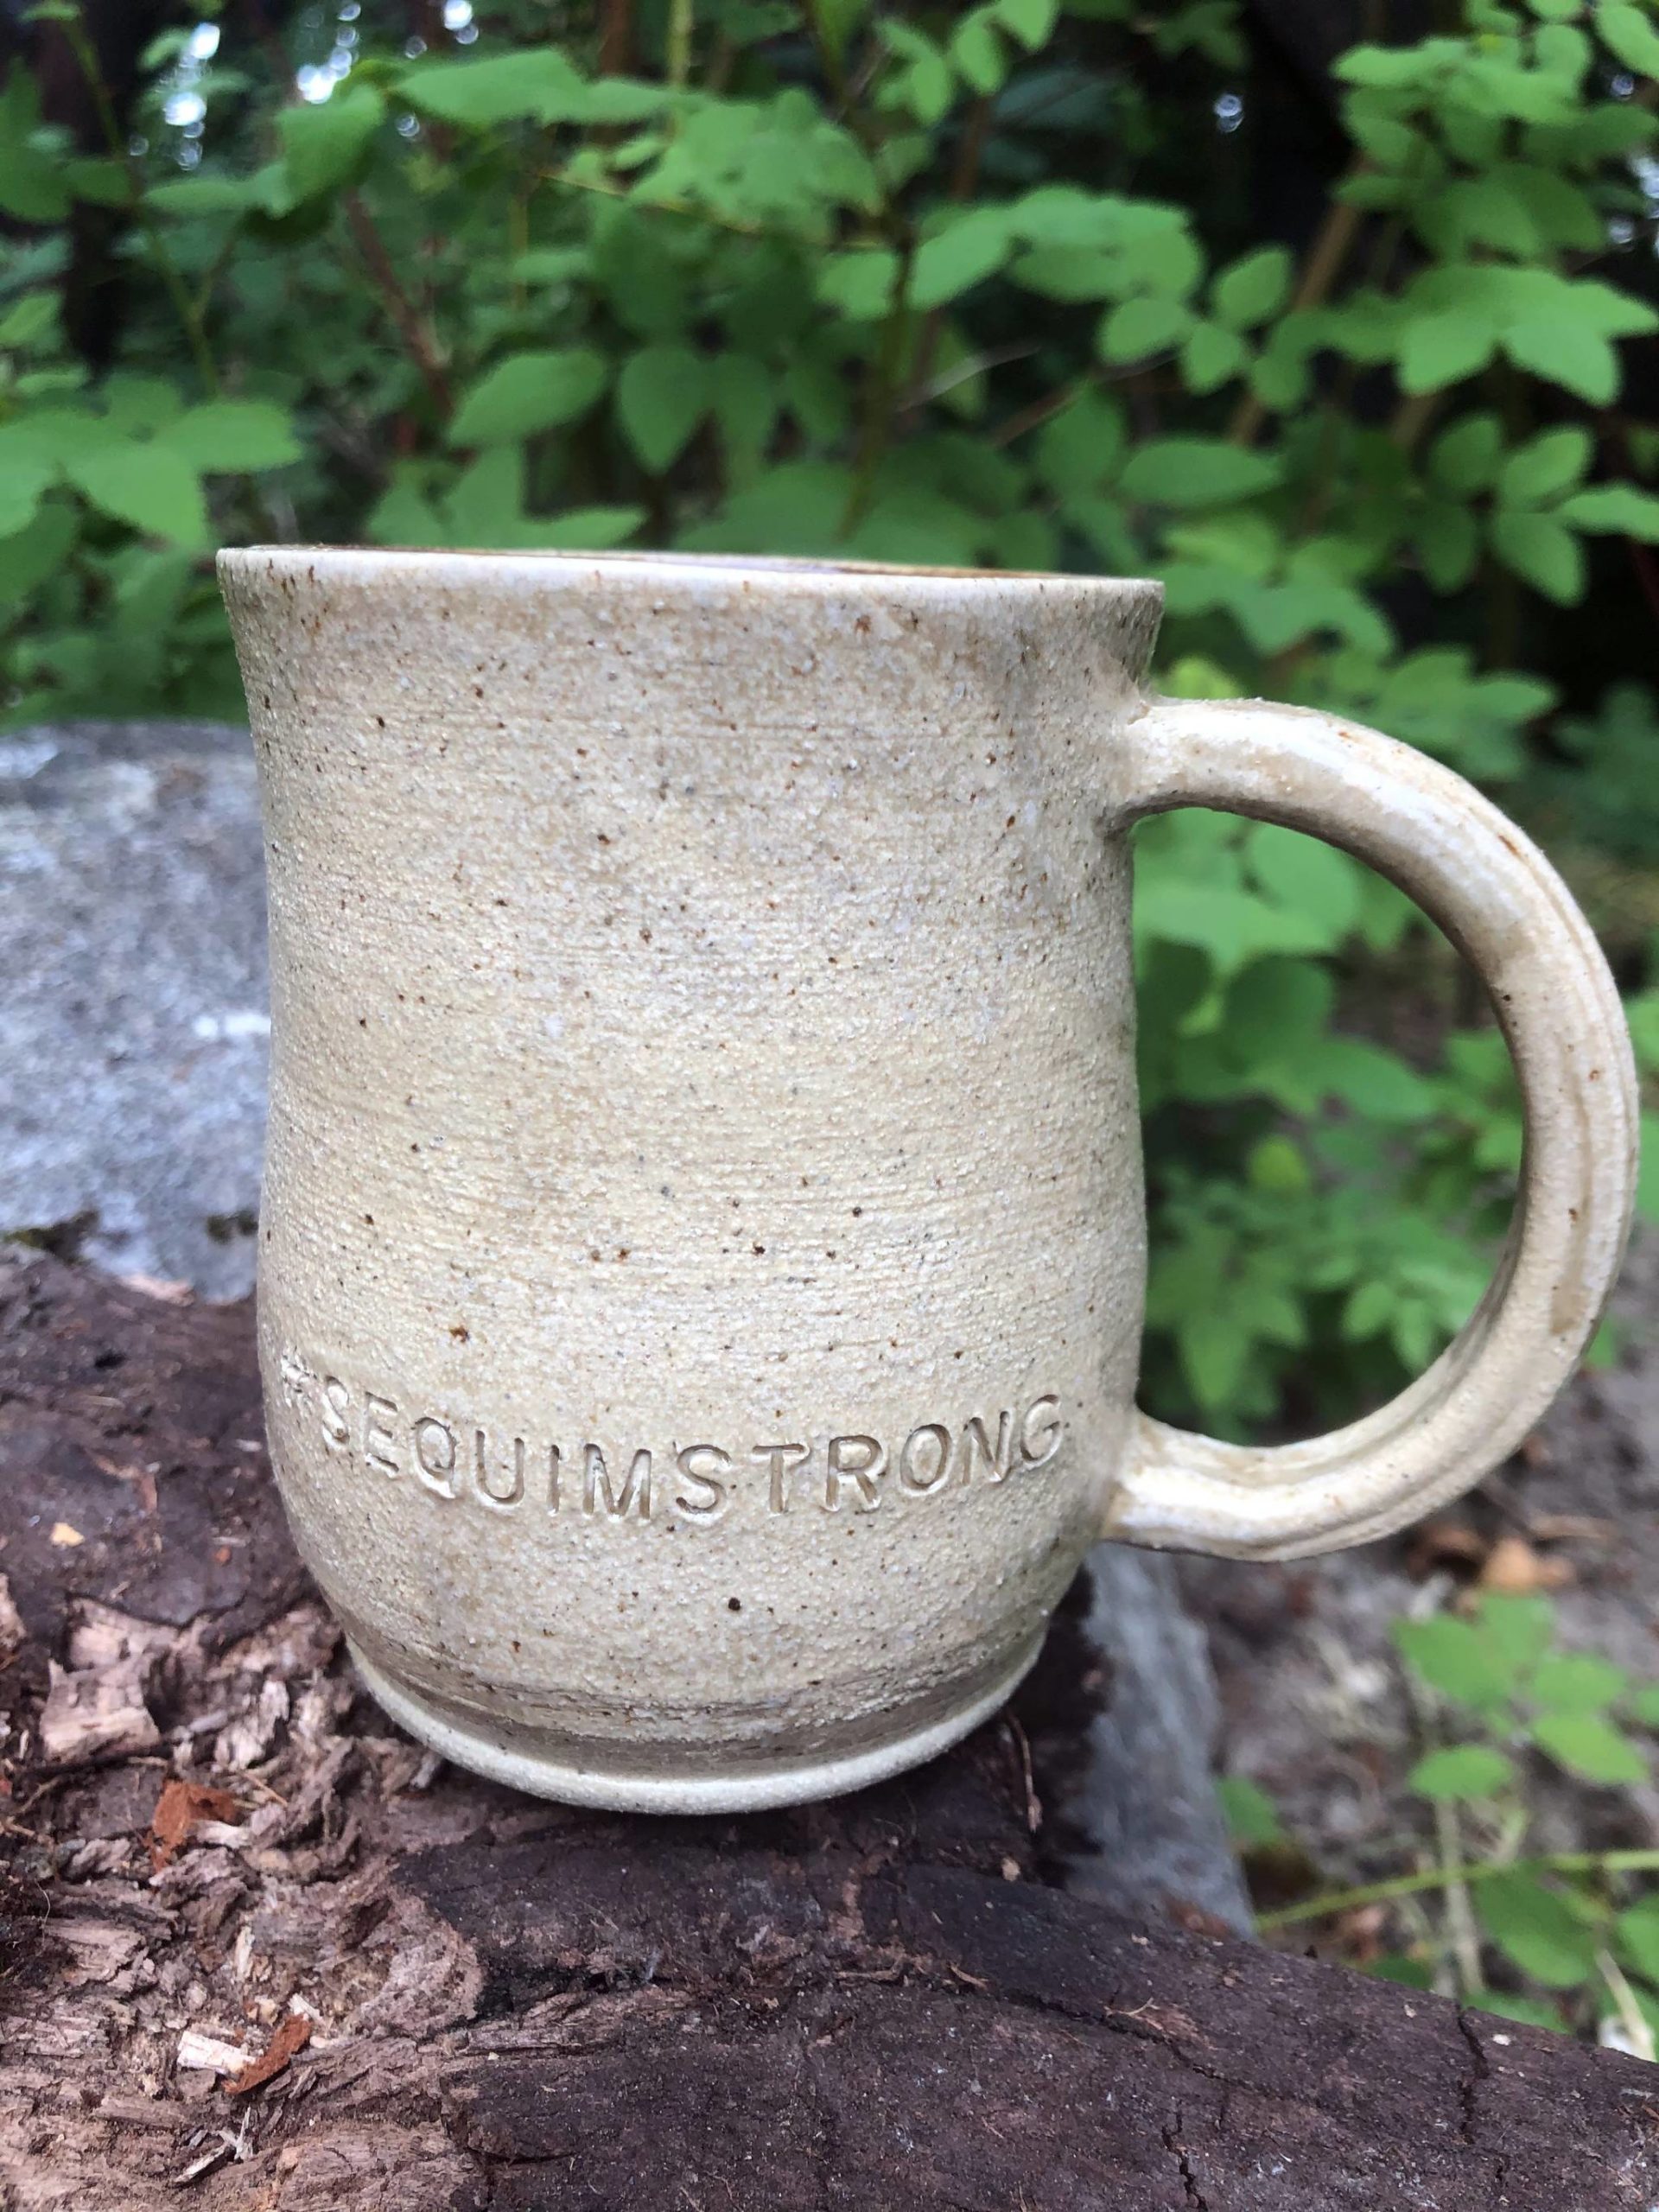 Mike Walker of Central California found this mug along the Olympic Discovery Trail. He discovered it was placed by Sydney Swanson of Sunshine Ceramics Studio. She hopes people who find her mugs on the trail enjoy them and check out her social media pages. Photo courtesy of Mike Walker